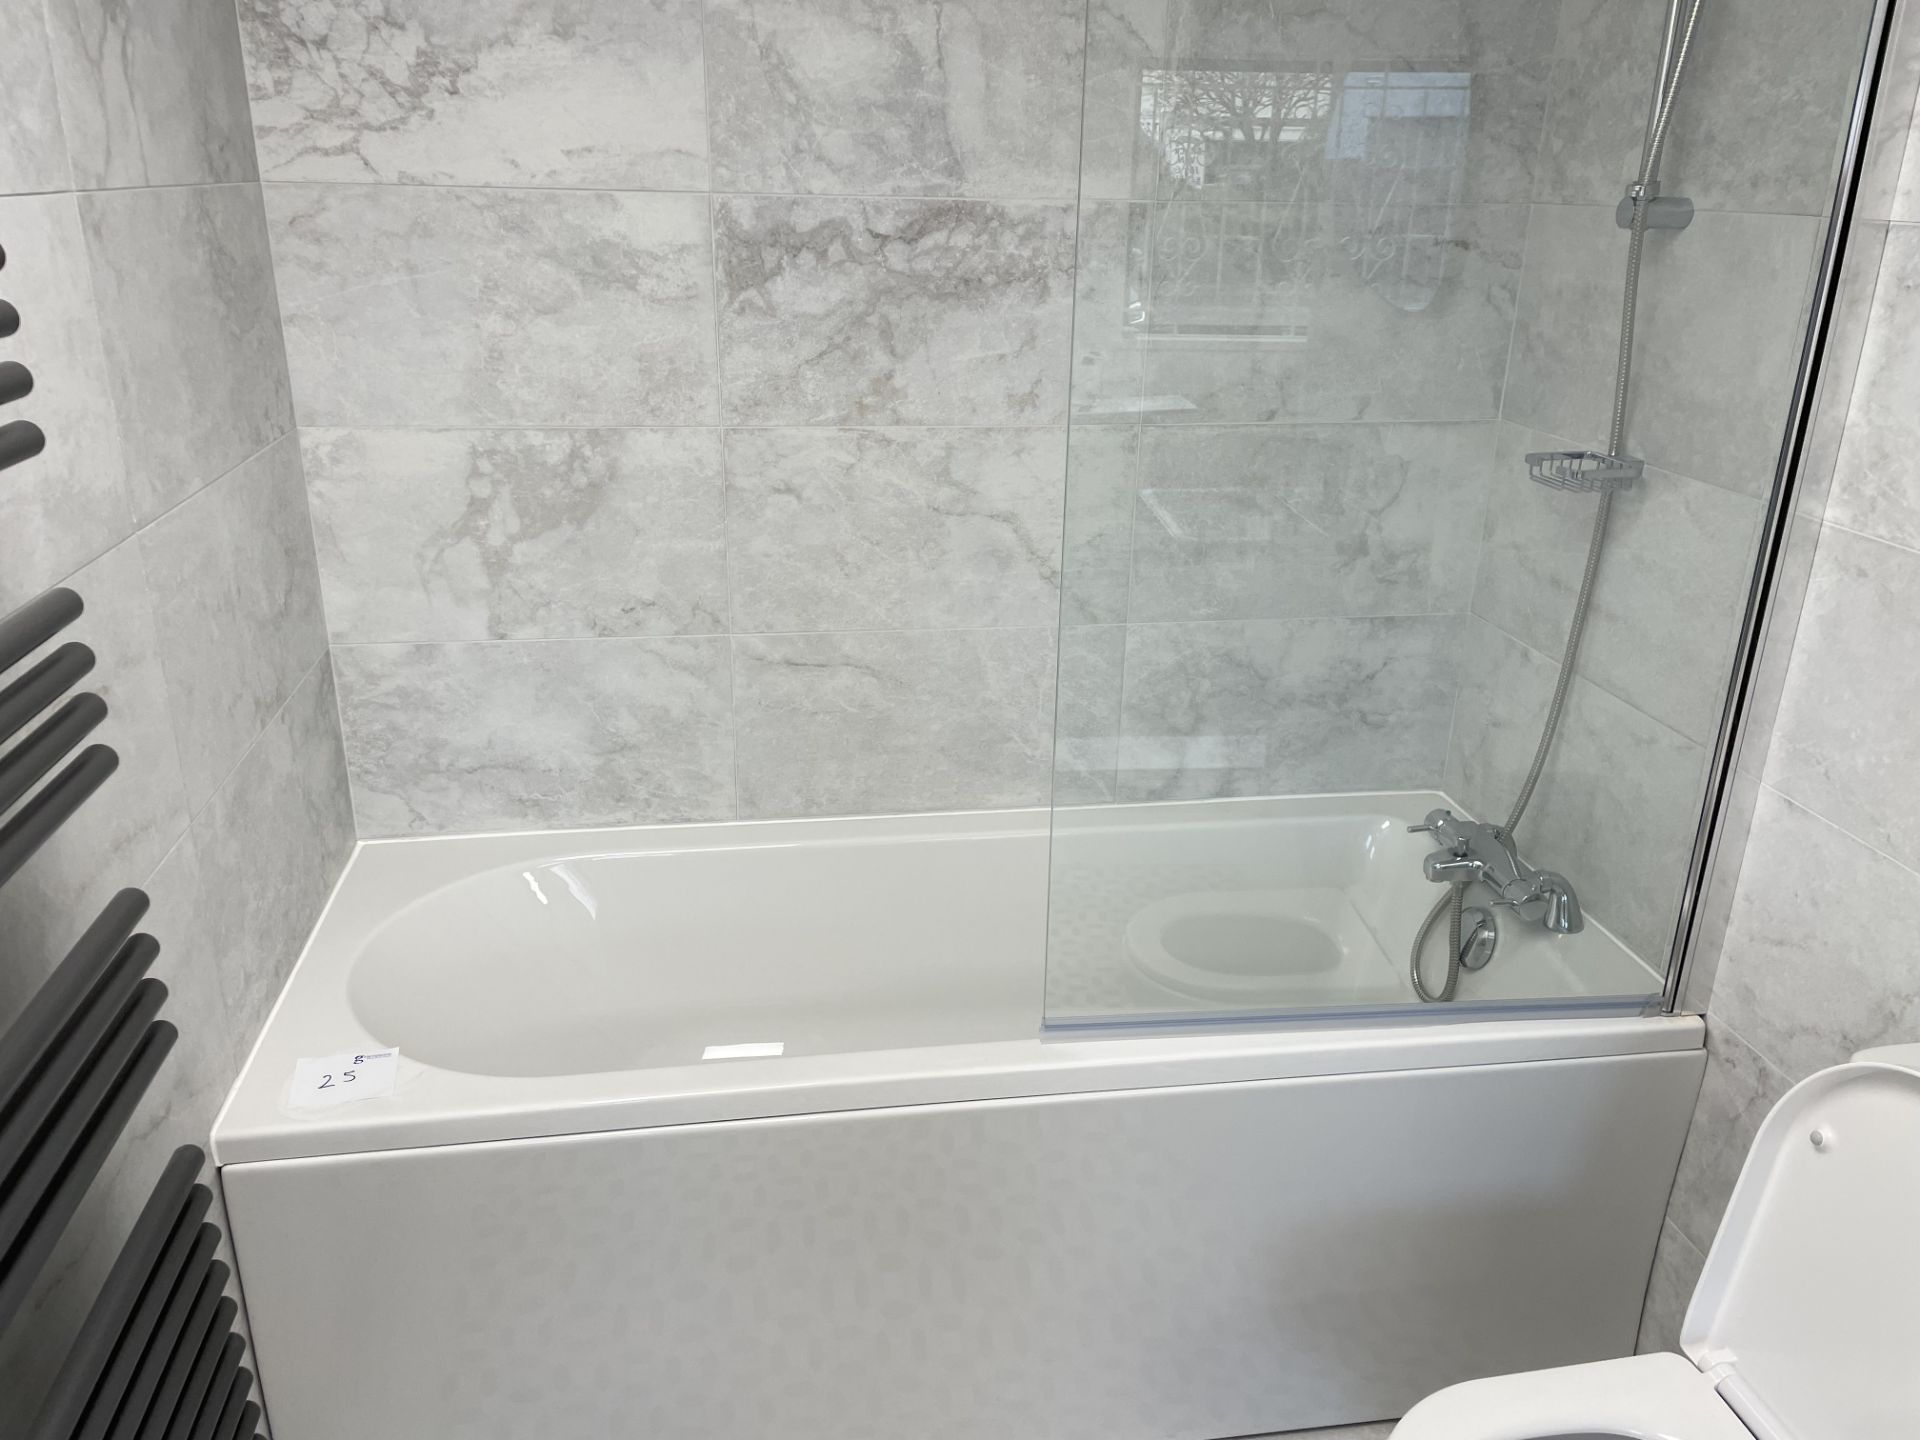 BATH WITH SIDE PANEL MIXER TAP & SHOWER SCREEN 700 x 1700 - Image 2 of 4